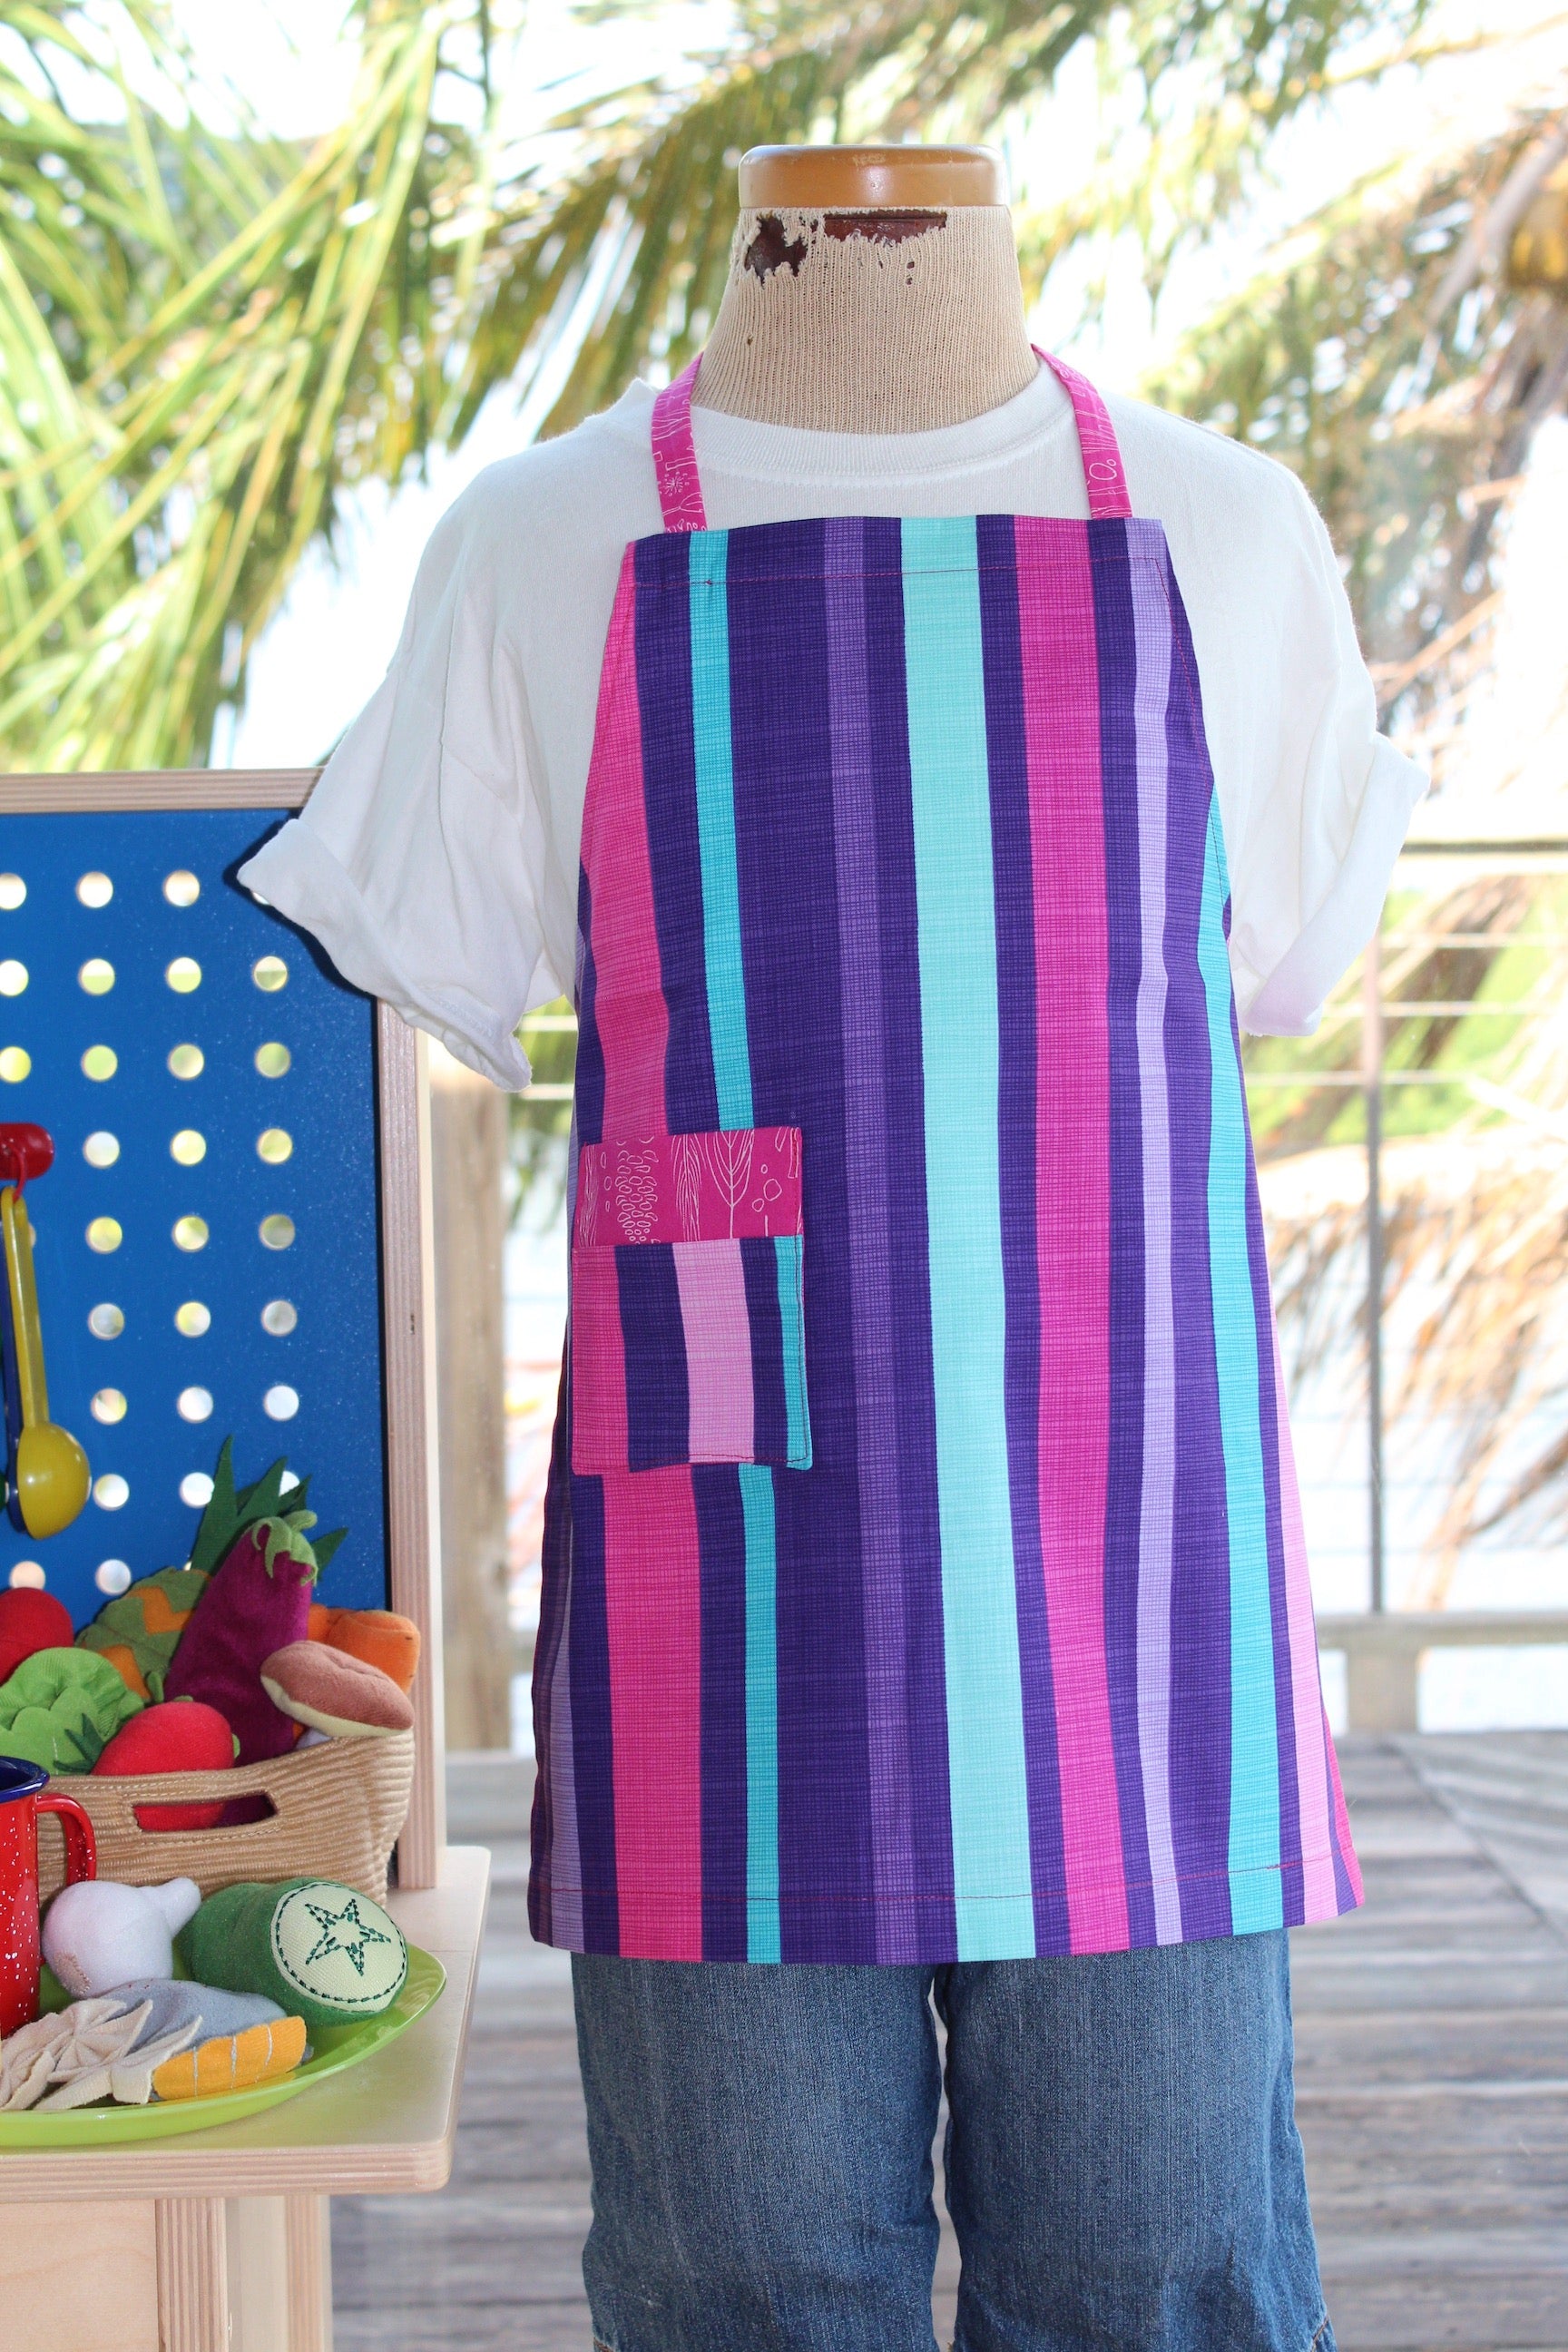 Jewel Box Kid's Apron-The Blue Peony-Age Group_Kids,Category_Apron,Color_Pink,Color_Purple,Color_Teal,Department_Kitchen,Gender_Girls,Material_Cotton,Pattern_Graphic,Pattern_Stripes,Size_Small (ages up to 5)